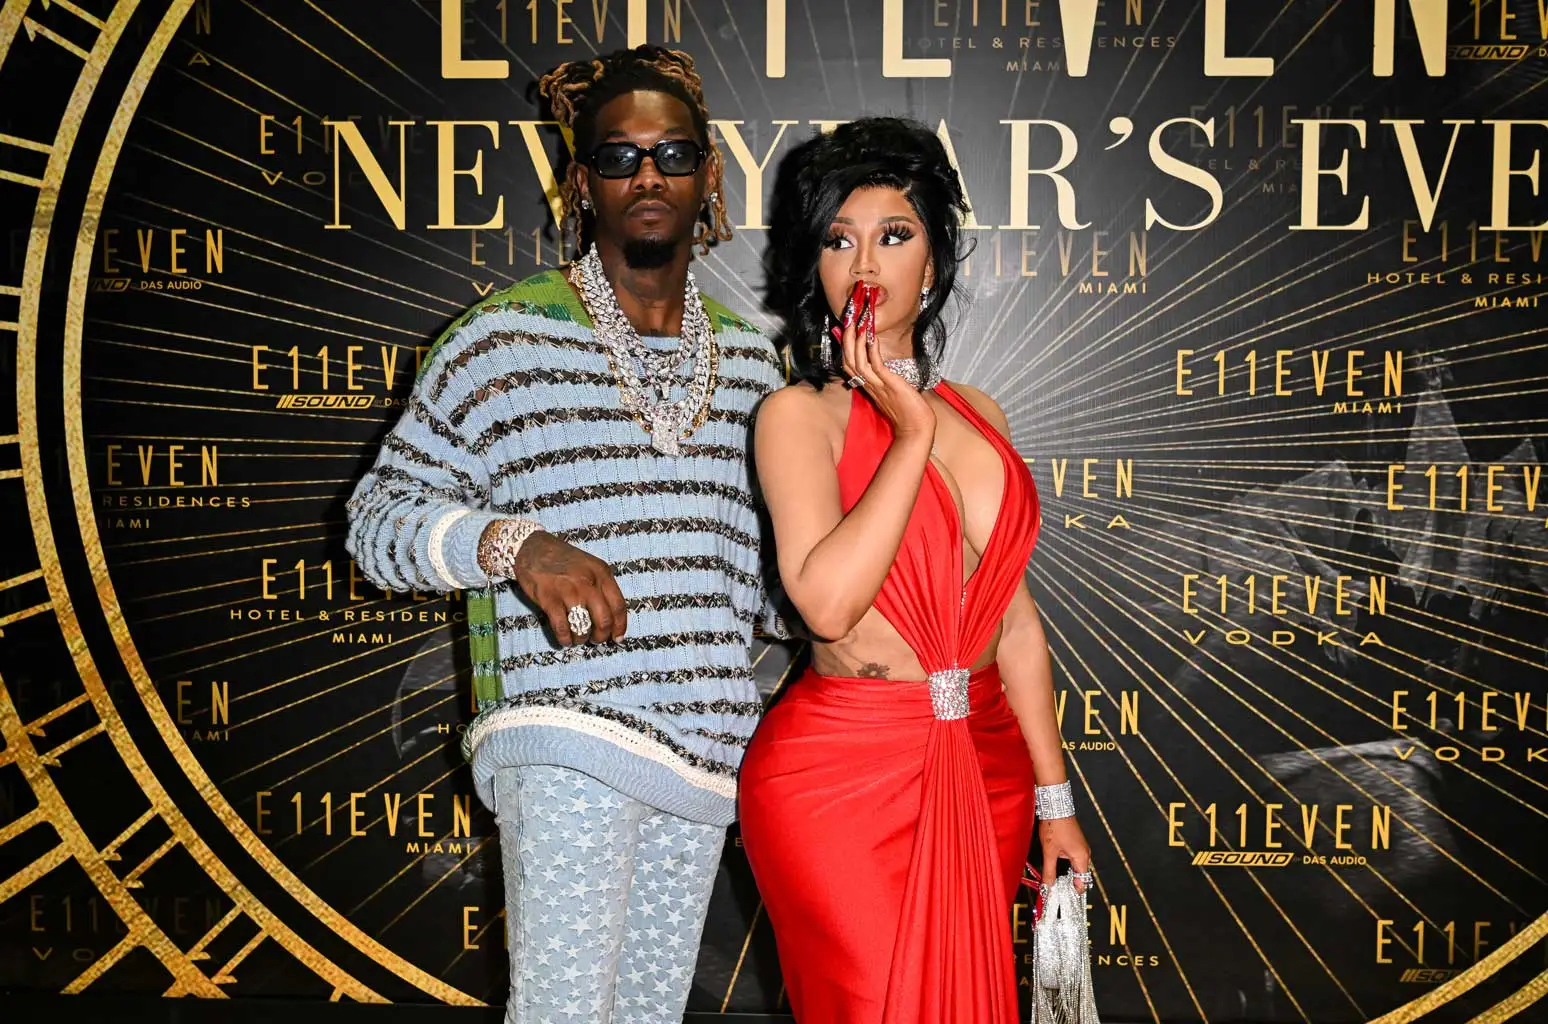 Cardi B Responds to ‘Stupid’ Husband Offset’s Claim She ‘F*cked’ Another Man [Video]